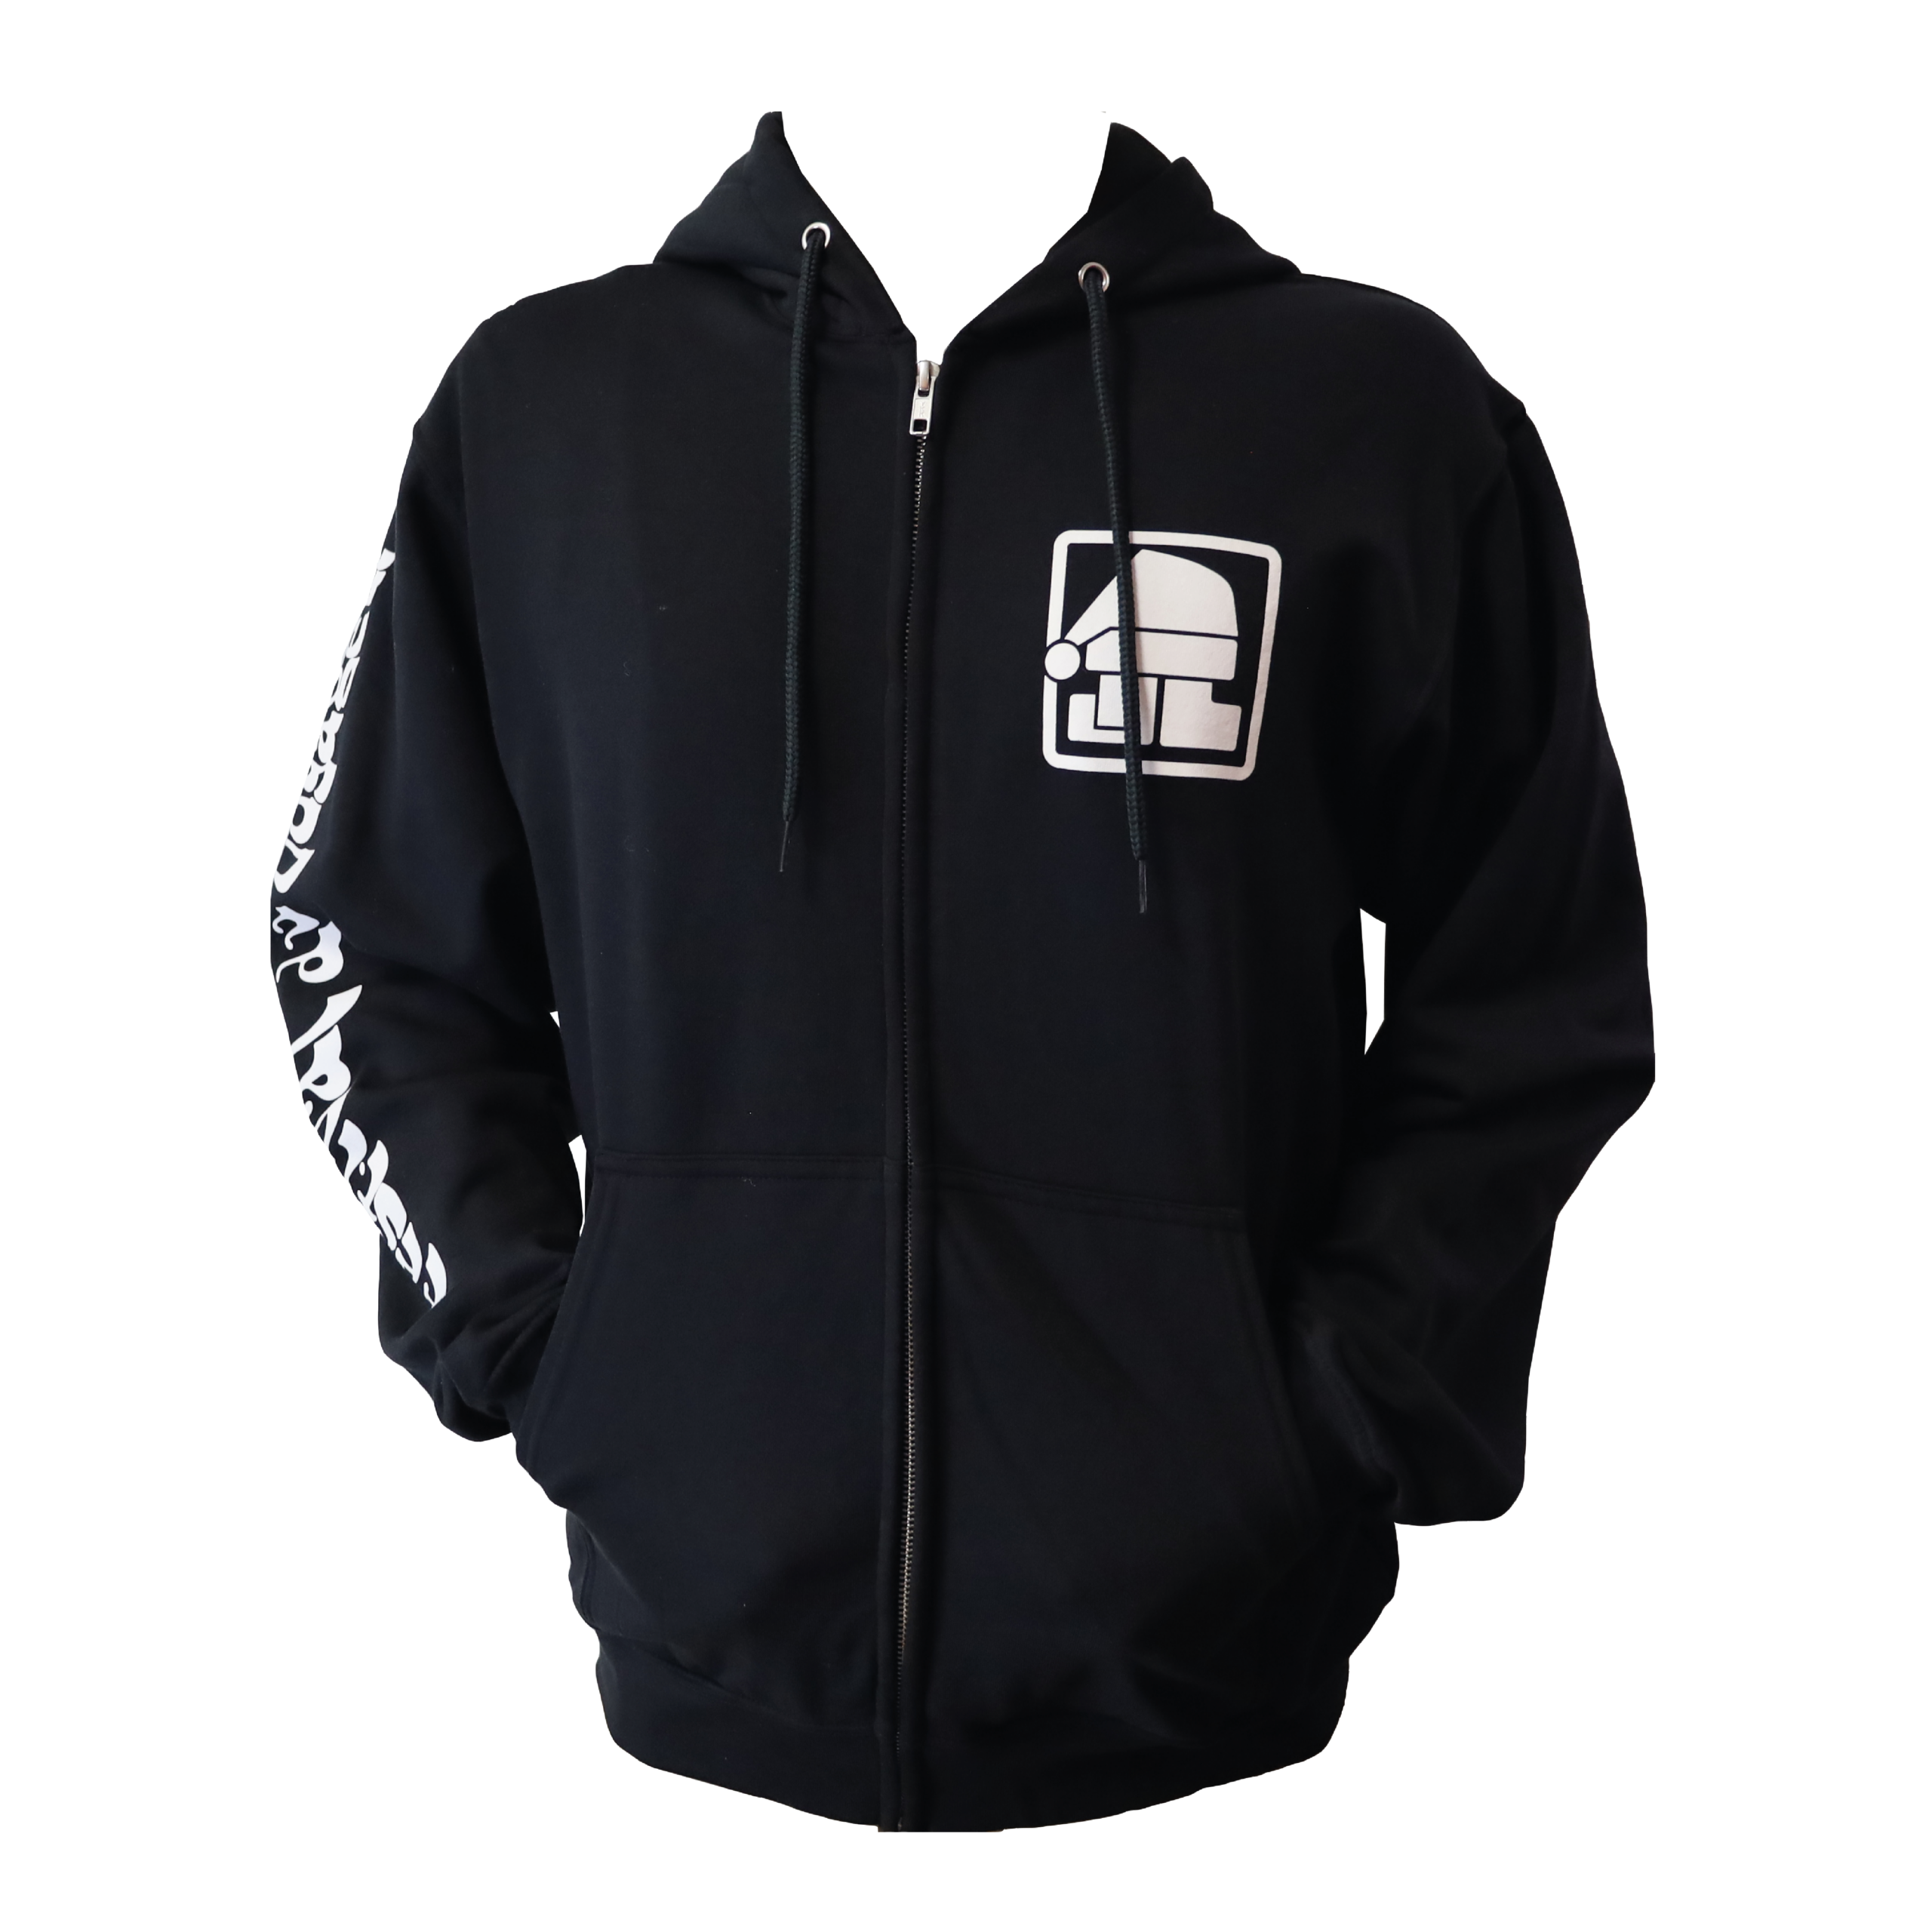 Featured image for “FDV Full Zip Hoodies”